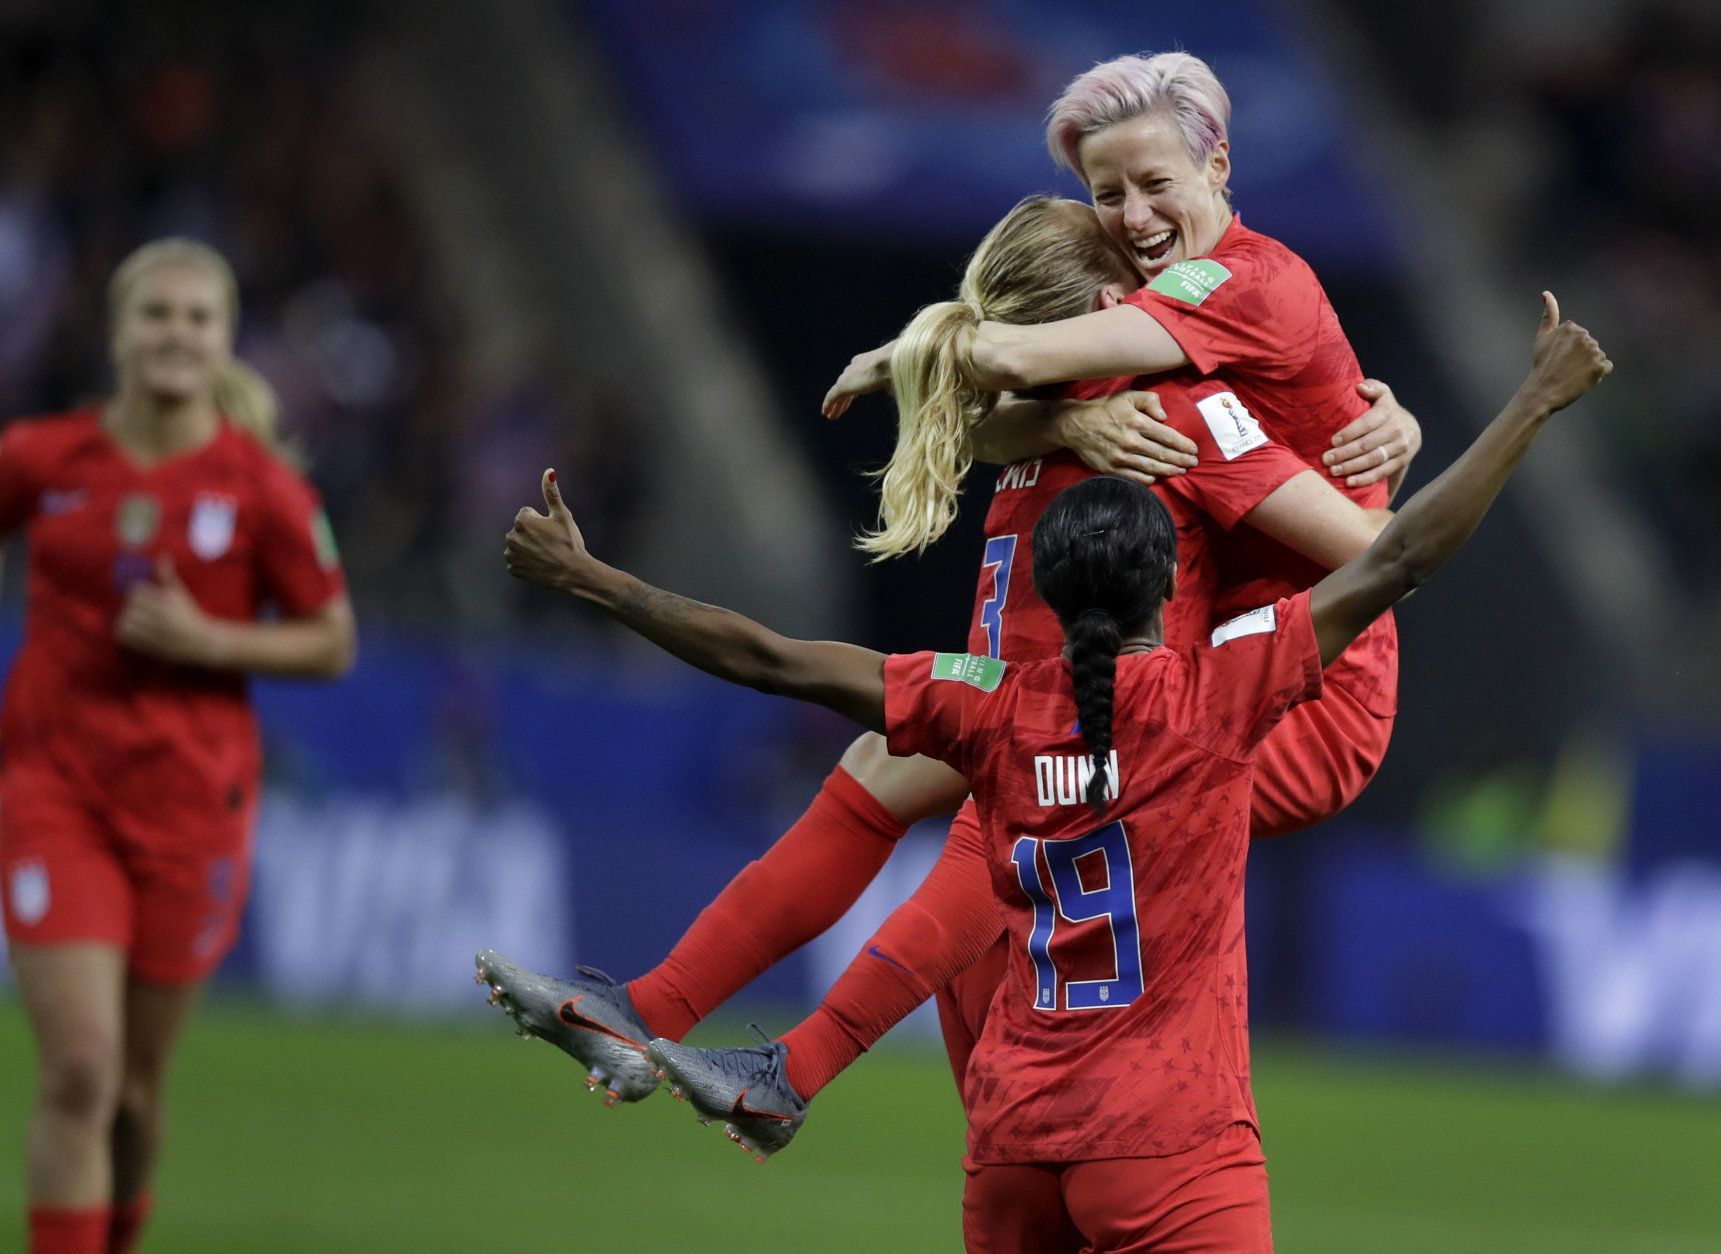 United States' scorer Samantha Mewis lifts her teammate Megan Rapinoe as she celebrates her side's 4rth goal during the Women's World Cup Group F soccer match between United States and Thailand at the Stade Auguste-Delaune in Reims, France, Tuesday, June 11, 2019. (AP Photo/Alessandra Tarantino)